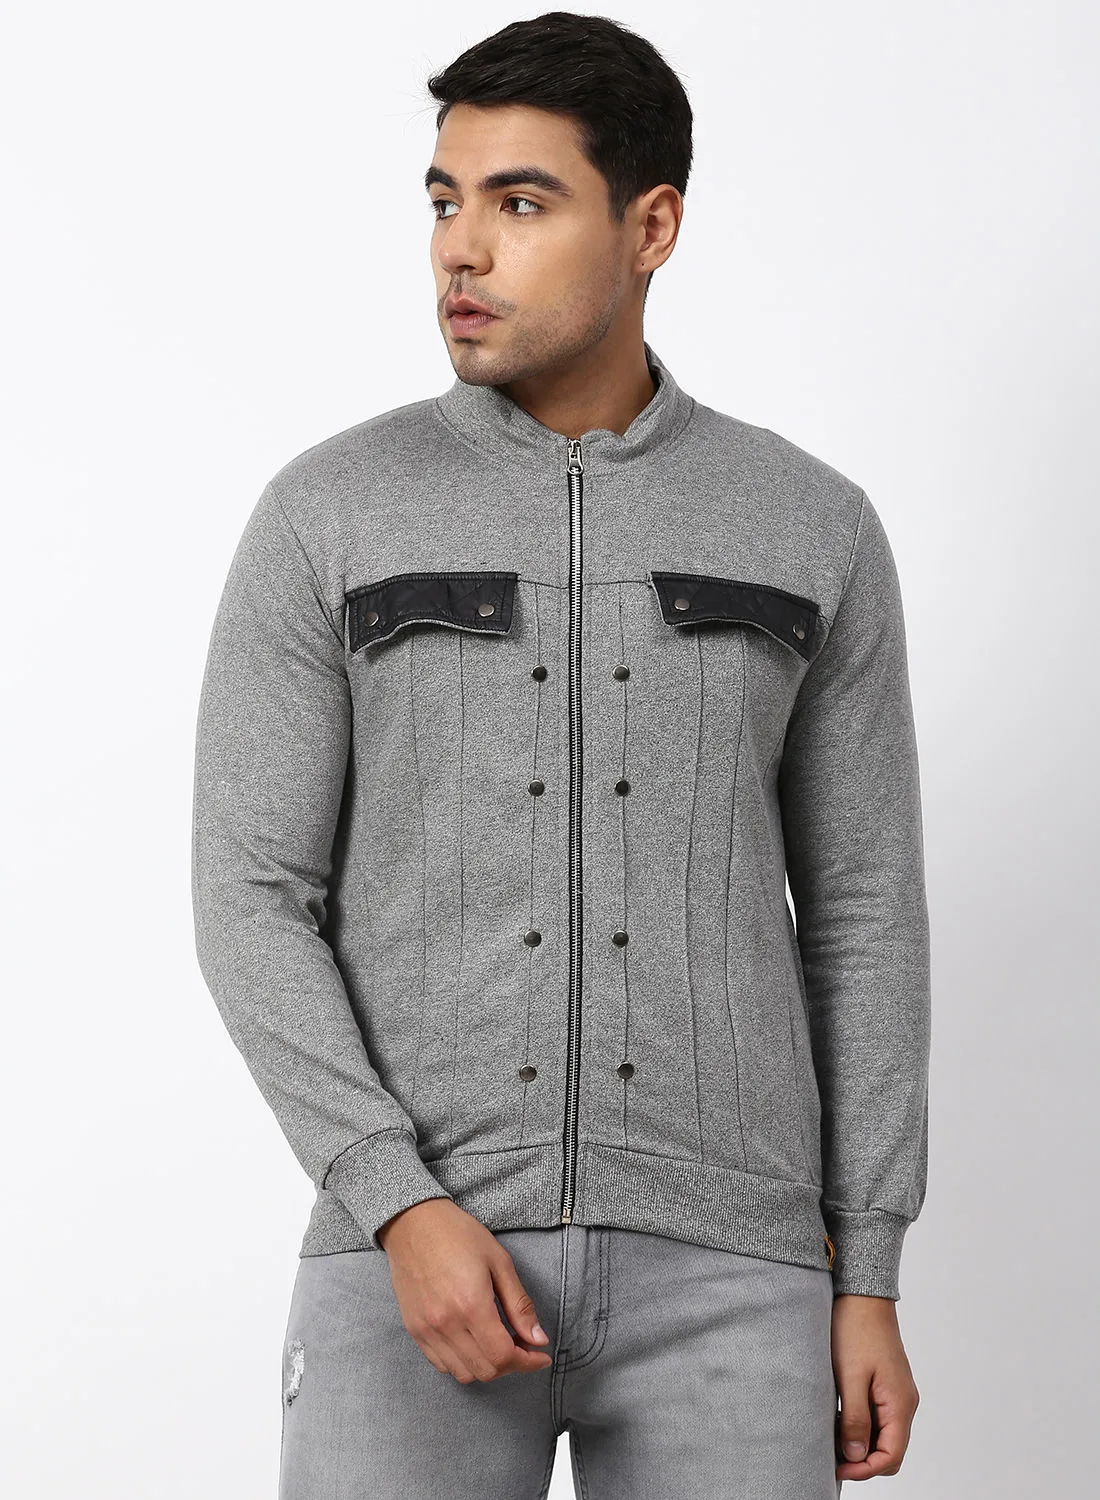 Campus Sutra Outerwear Comfortable Jacket Grey